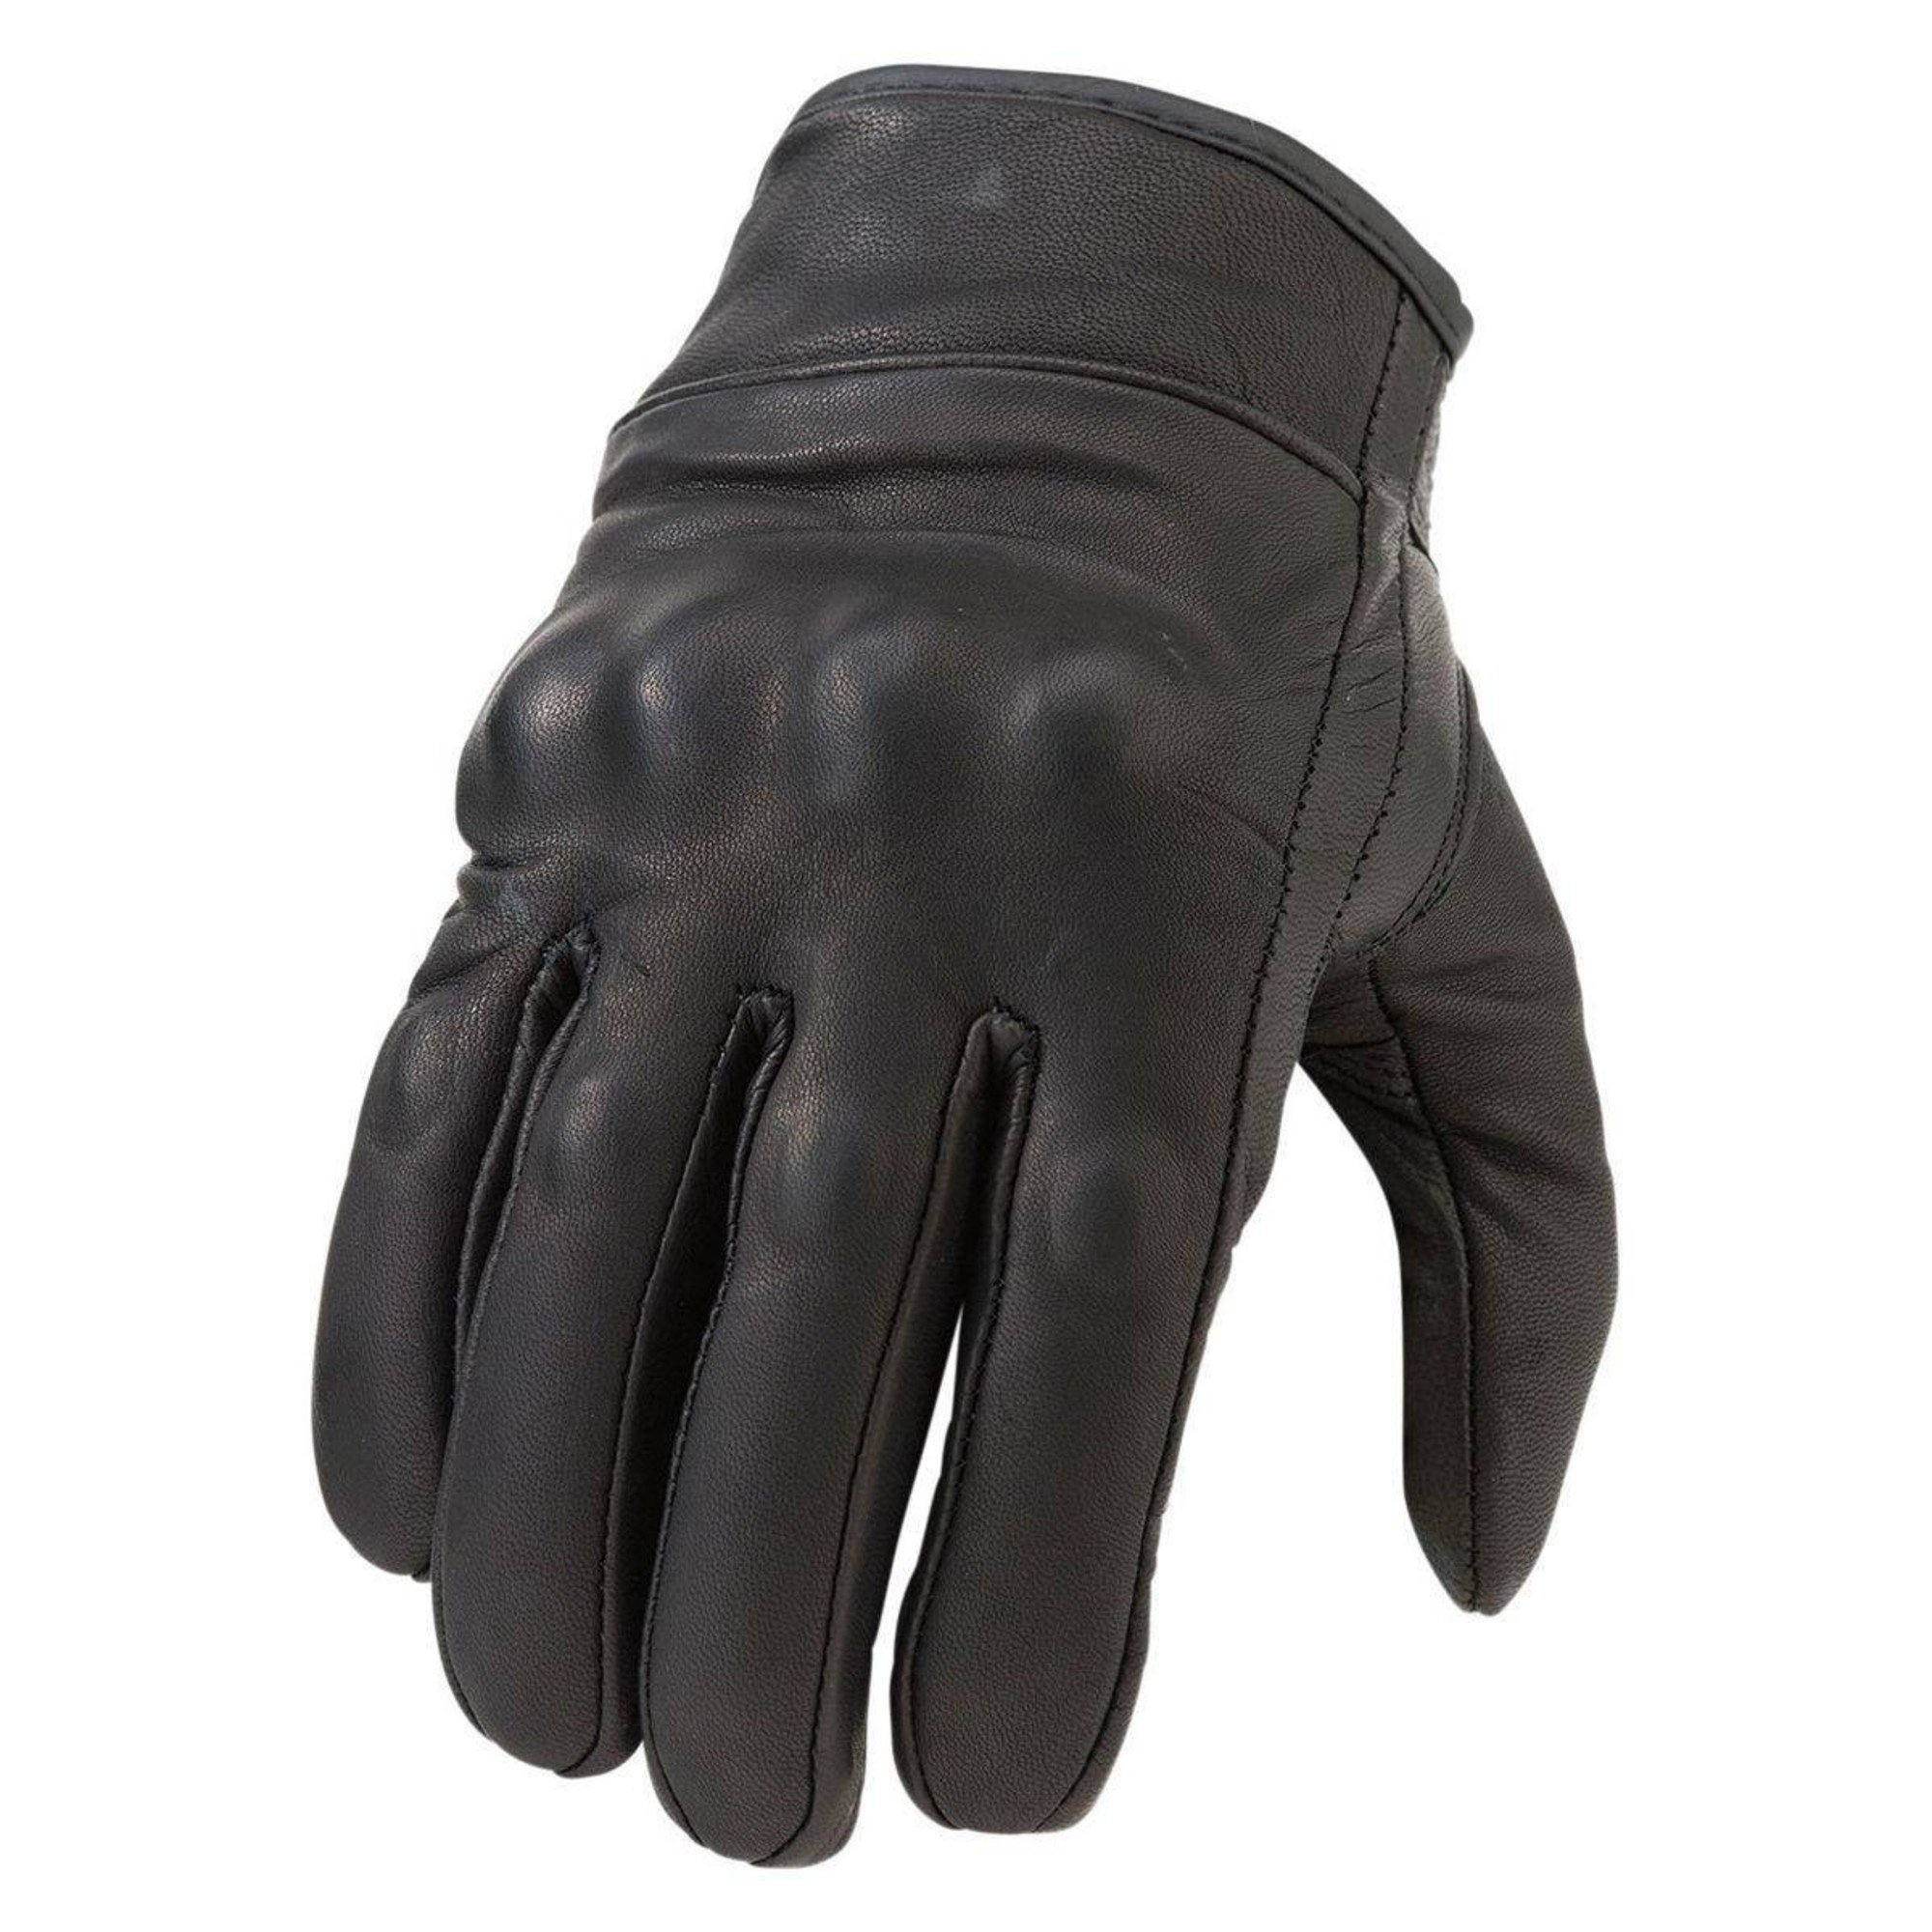 z1r leather gloves for mens 270 perforated